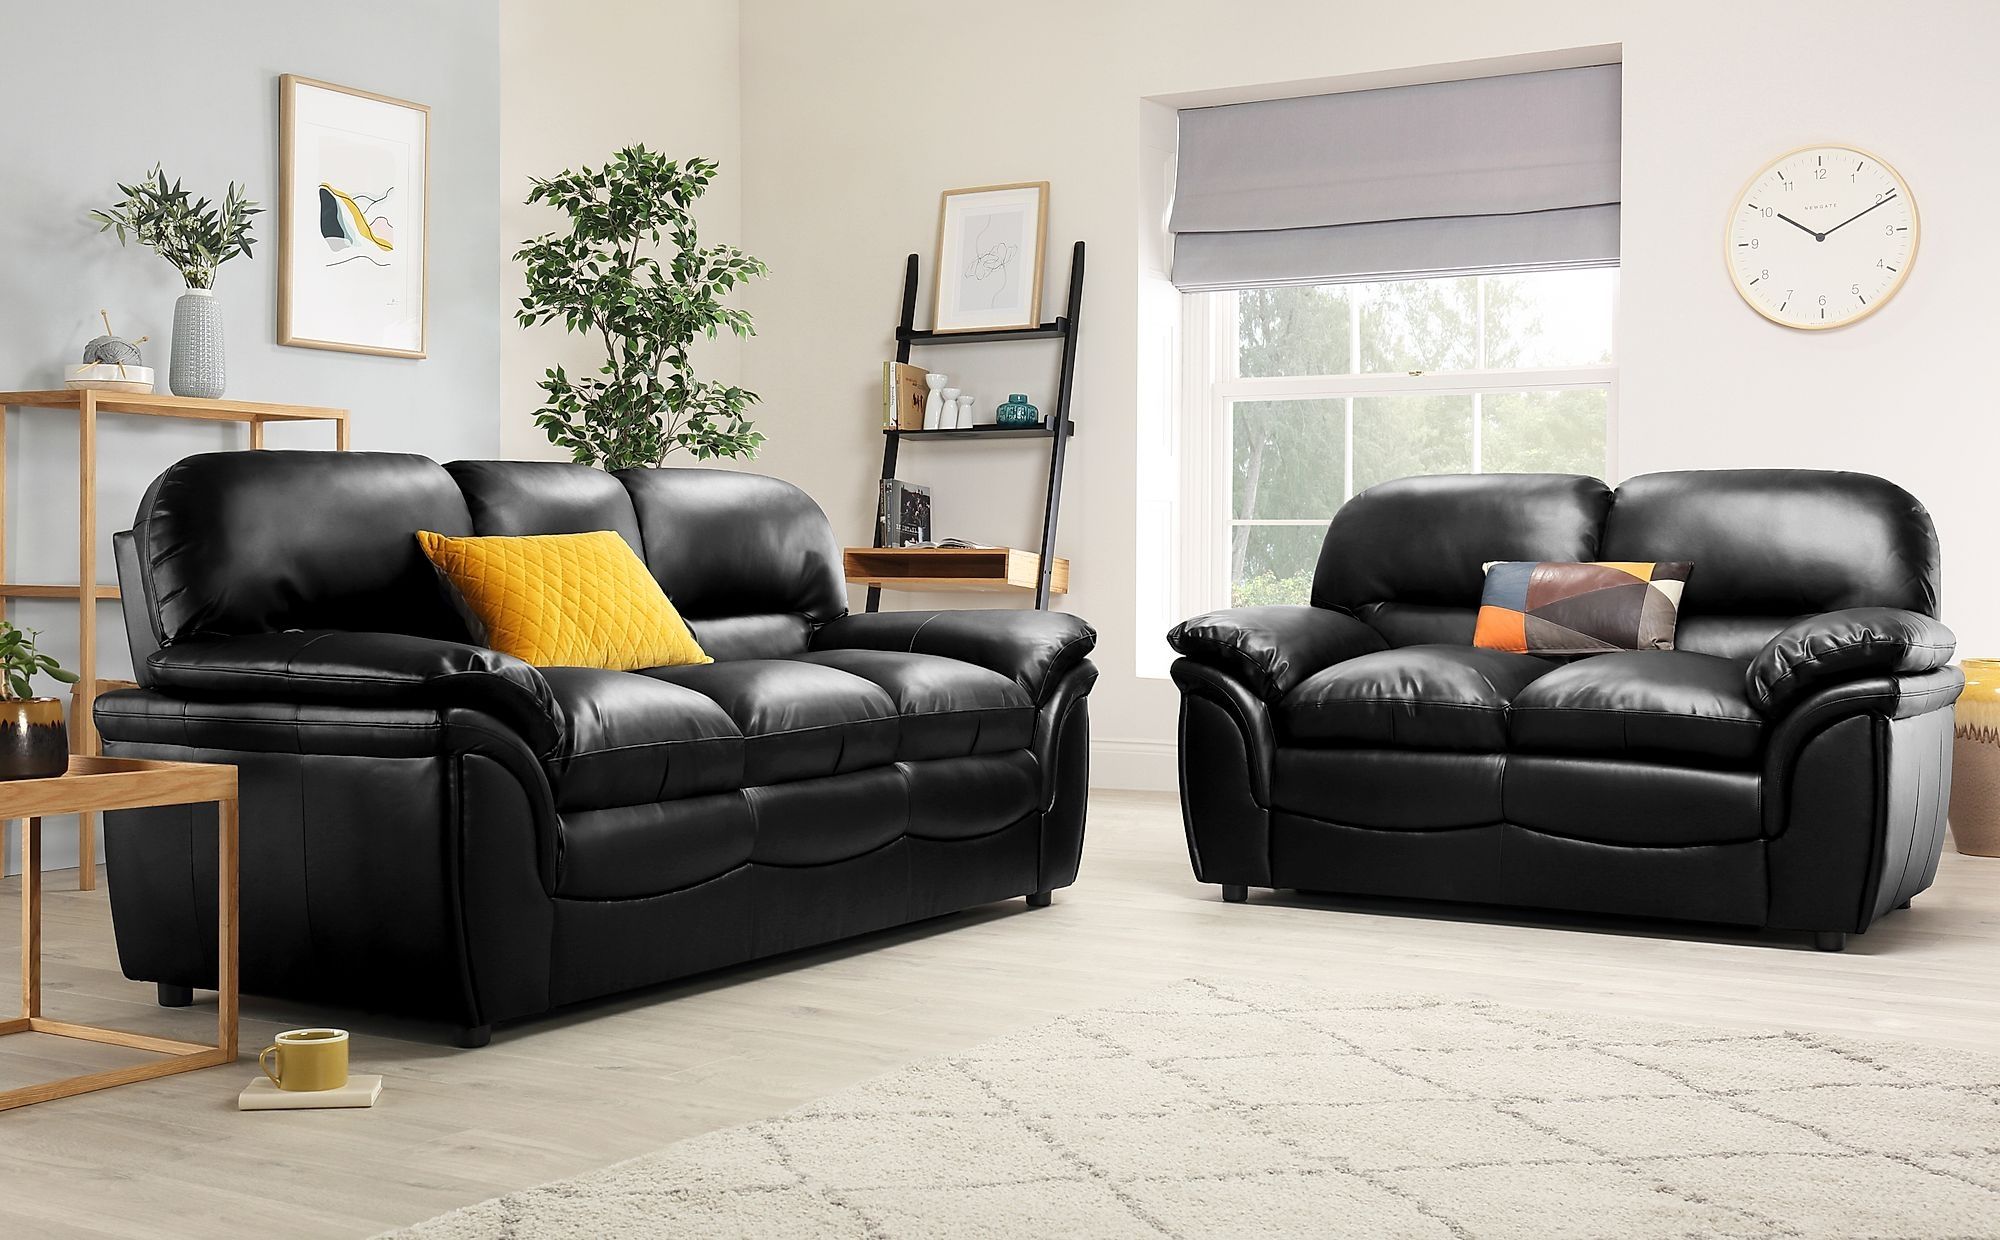 8 Photos Rochester Black Leather 3 Seater Sofa And Description – Alqu Blog Regarding 3 Seat L Shaped Sofas In Black (View 12 of 20)